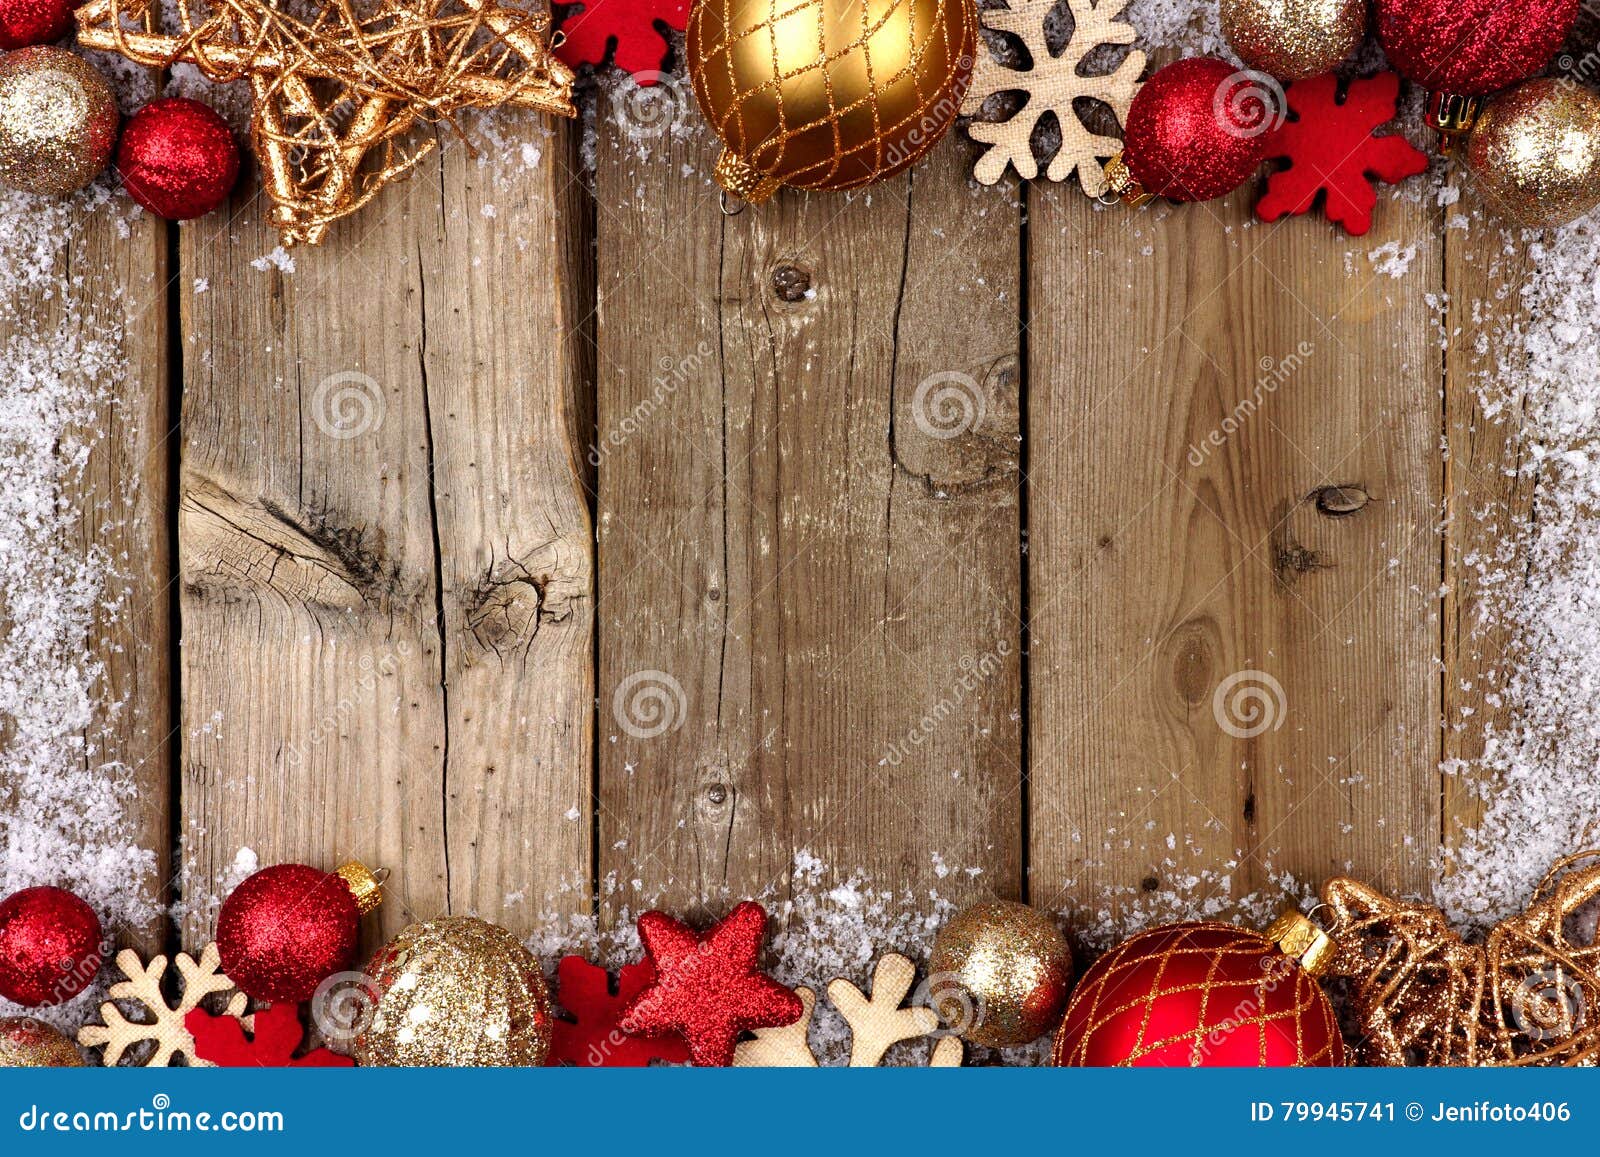 Red and Gold Christmas Double Border with Snow on Wood Stock Image ...